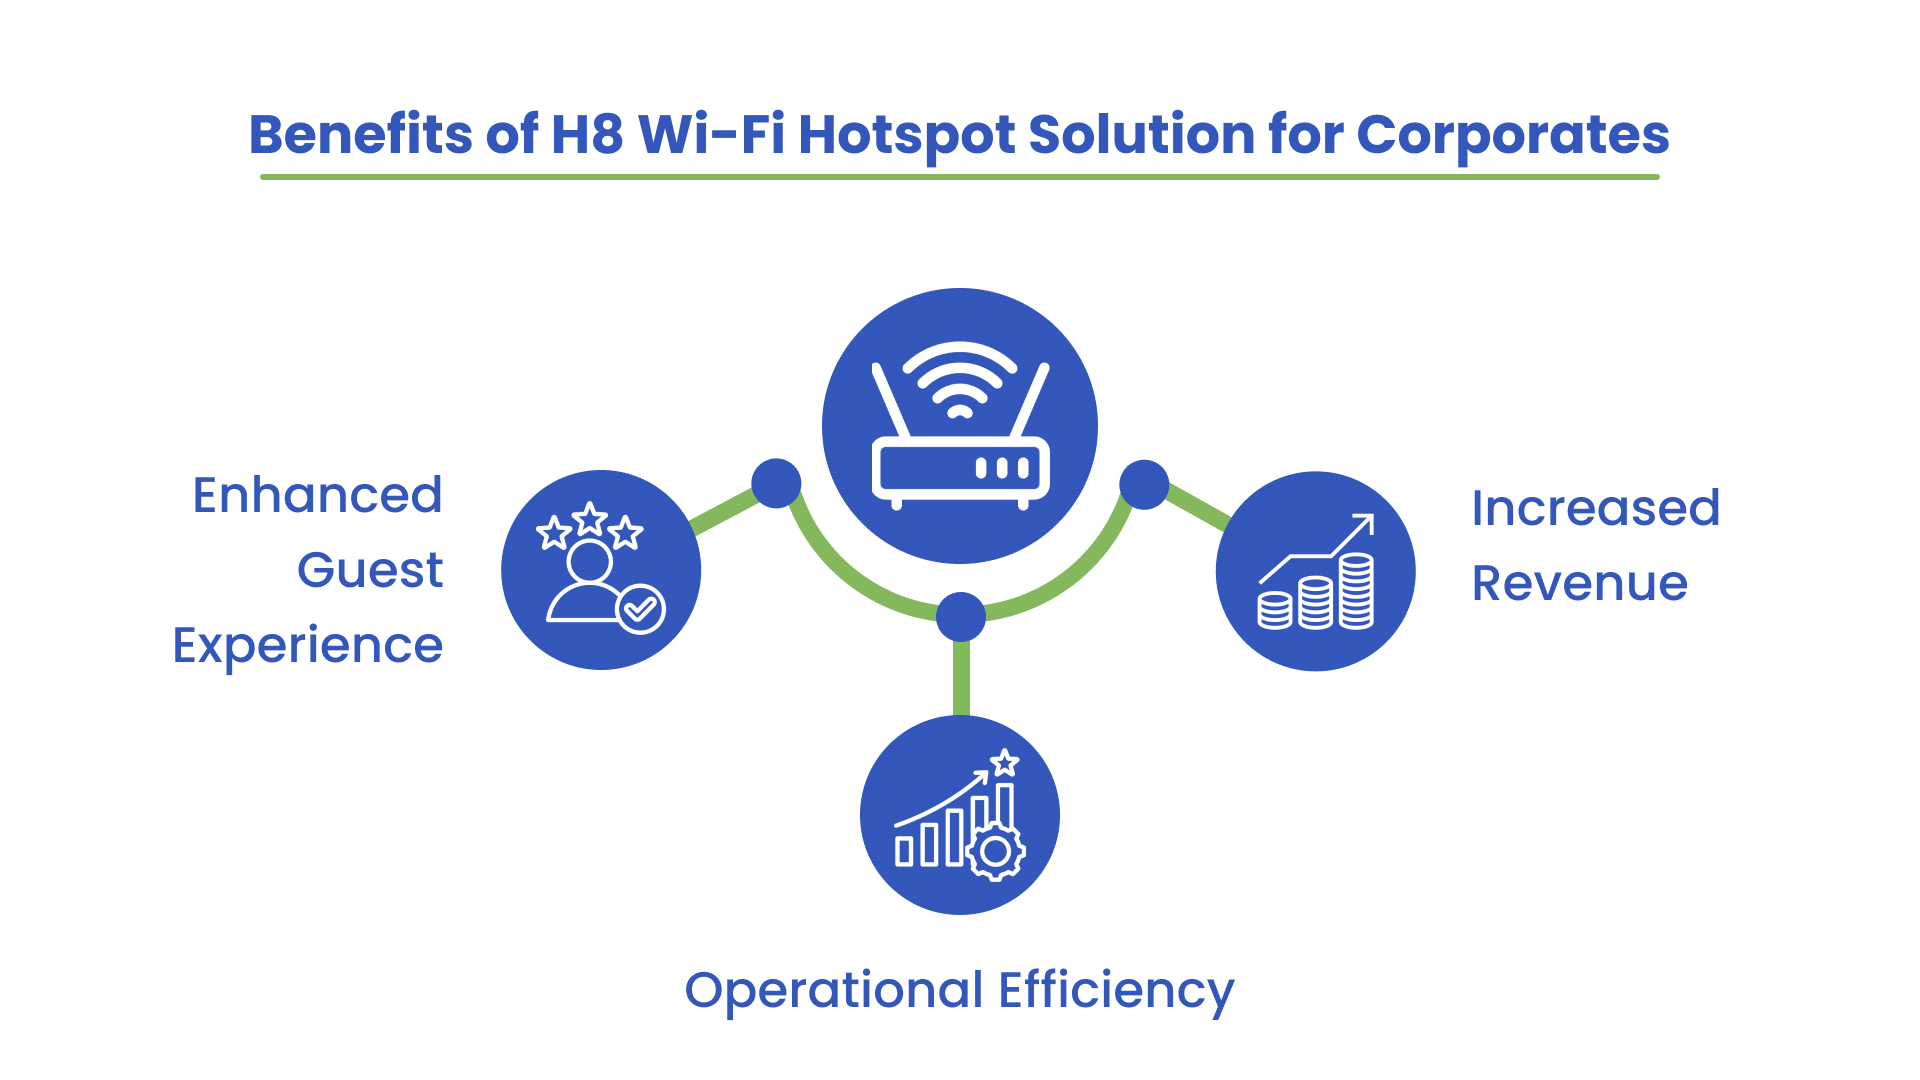 Benefits of H8 Wi-Fi Hotspot Solution For Corporates